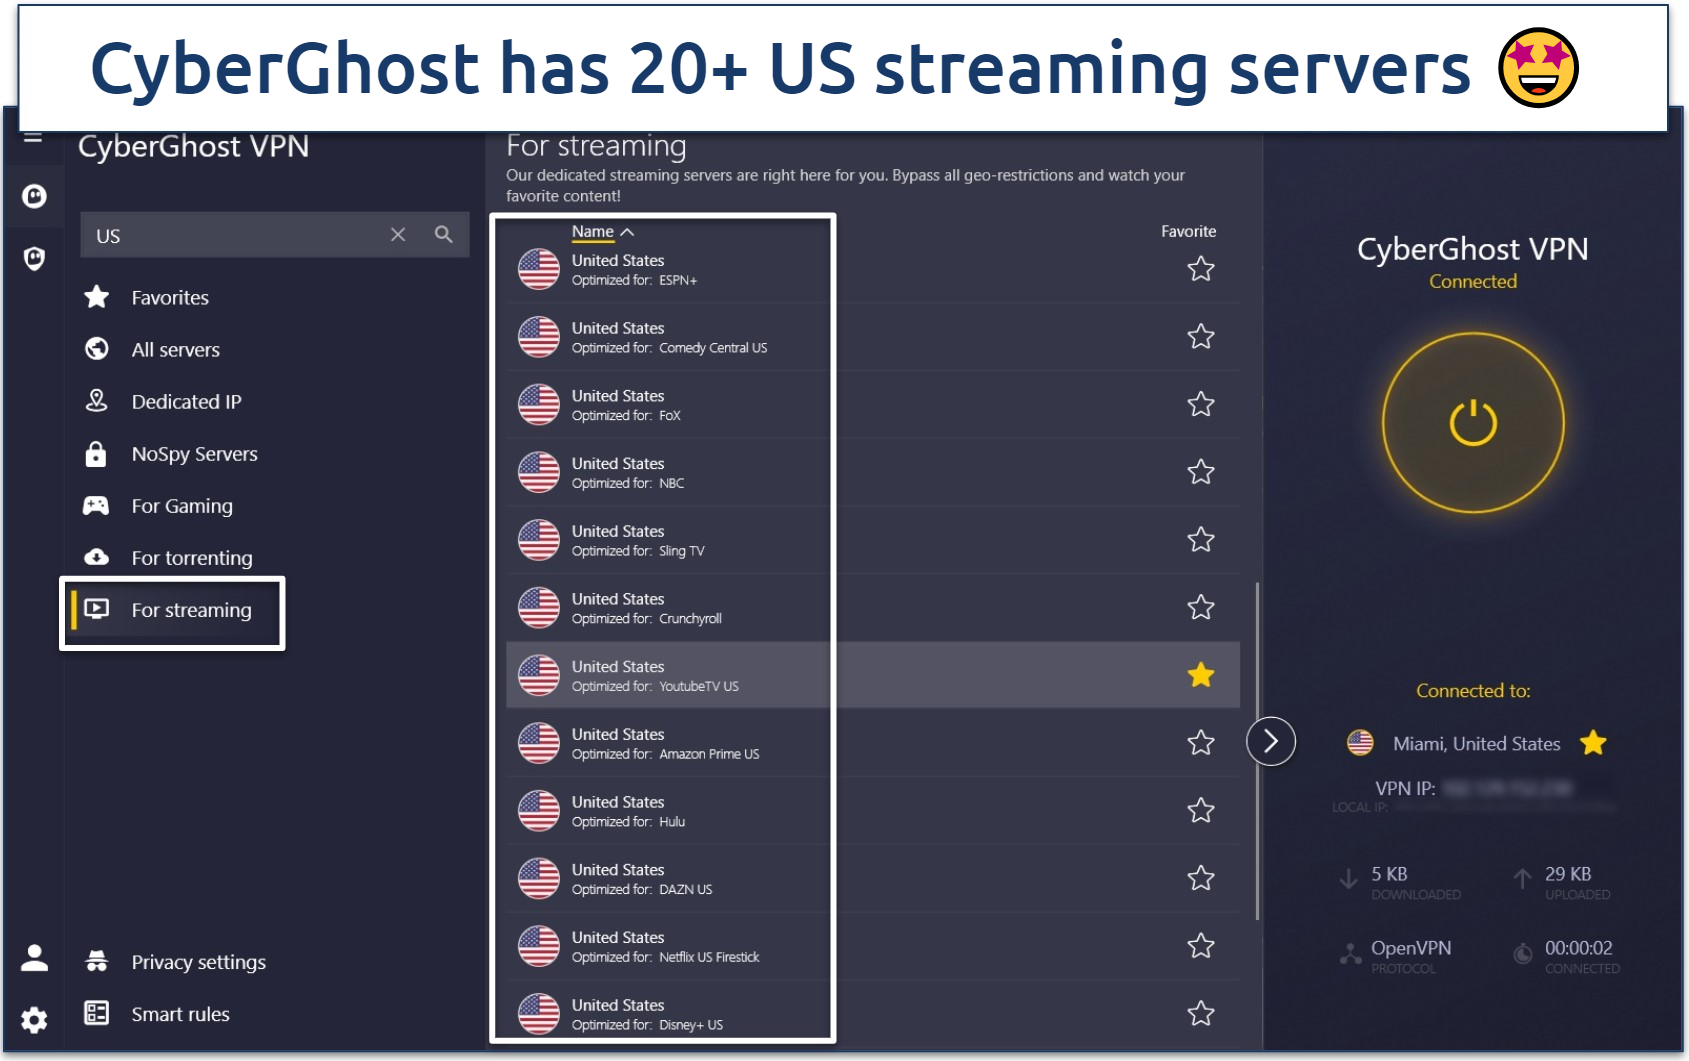 Screenshot of the CyberGhost VPN app with it's US streaming optimized servers for MLB highlighted.